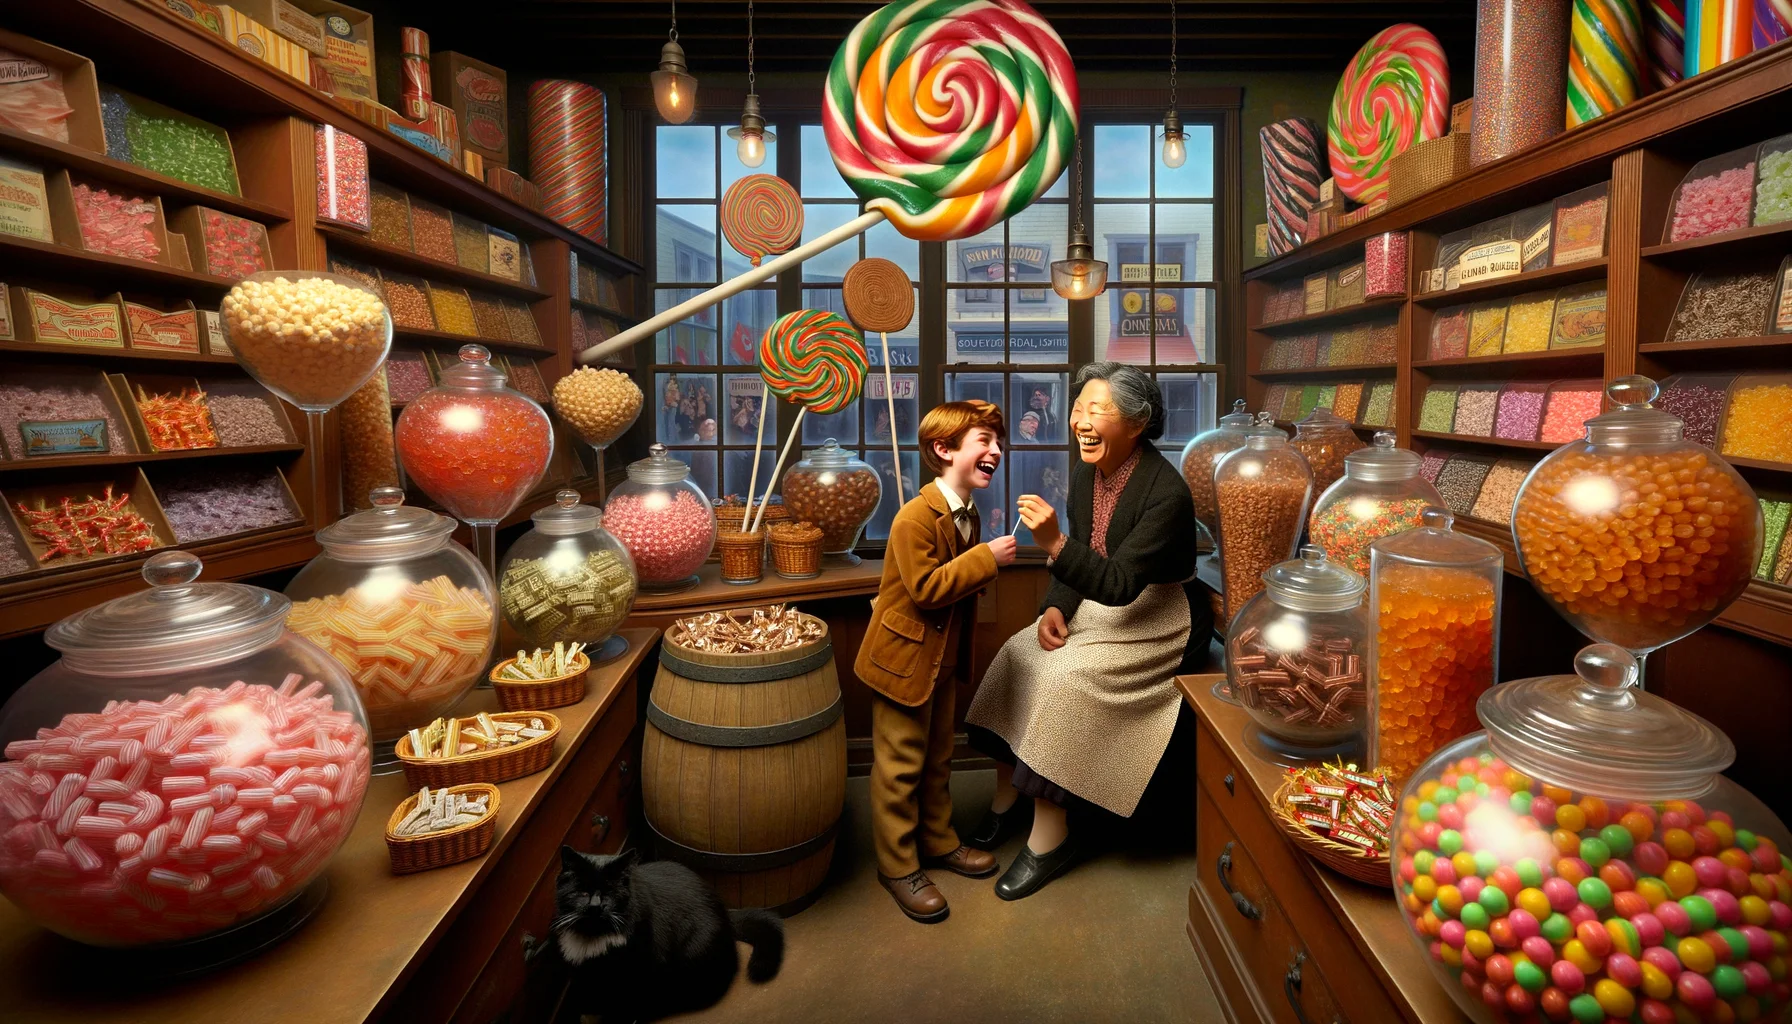 Imagine an amusing, lifelike scene of a traditional candy shop from the 1920s. The shelves within the shop are bursting with a colorful array of old-fashioned candies: long candy canes with swirling designs, glass jars filled with gleaming hard candies of every hue, barrels filled with taffy of various flavors, and trays of caramel fudges arrayed on the counter. The shopkeeper, an affable middle-aged East Asian woman, is laughing heartily at a joke shared by a young Caucasian boy, who is holding a large lollipop as big as his head. A black cat is curled up on a chair by the corner, nonchalantly watching the charming scene unfold.